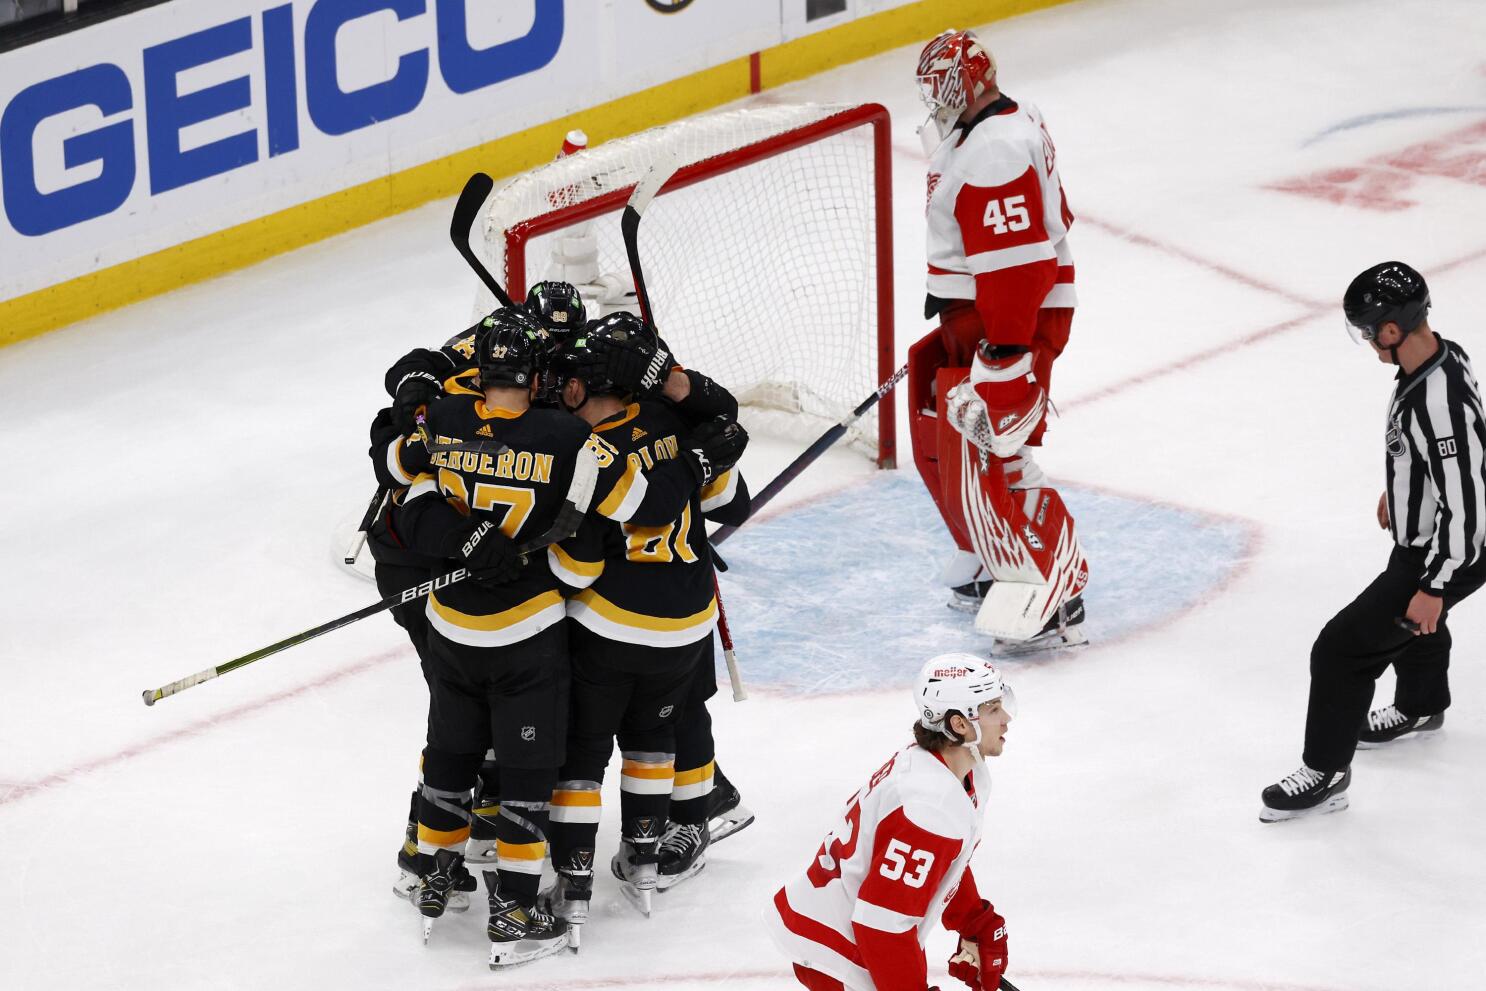 Boston Bruins lose to New Jersey Devils 3-2 in shootout 